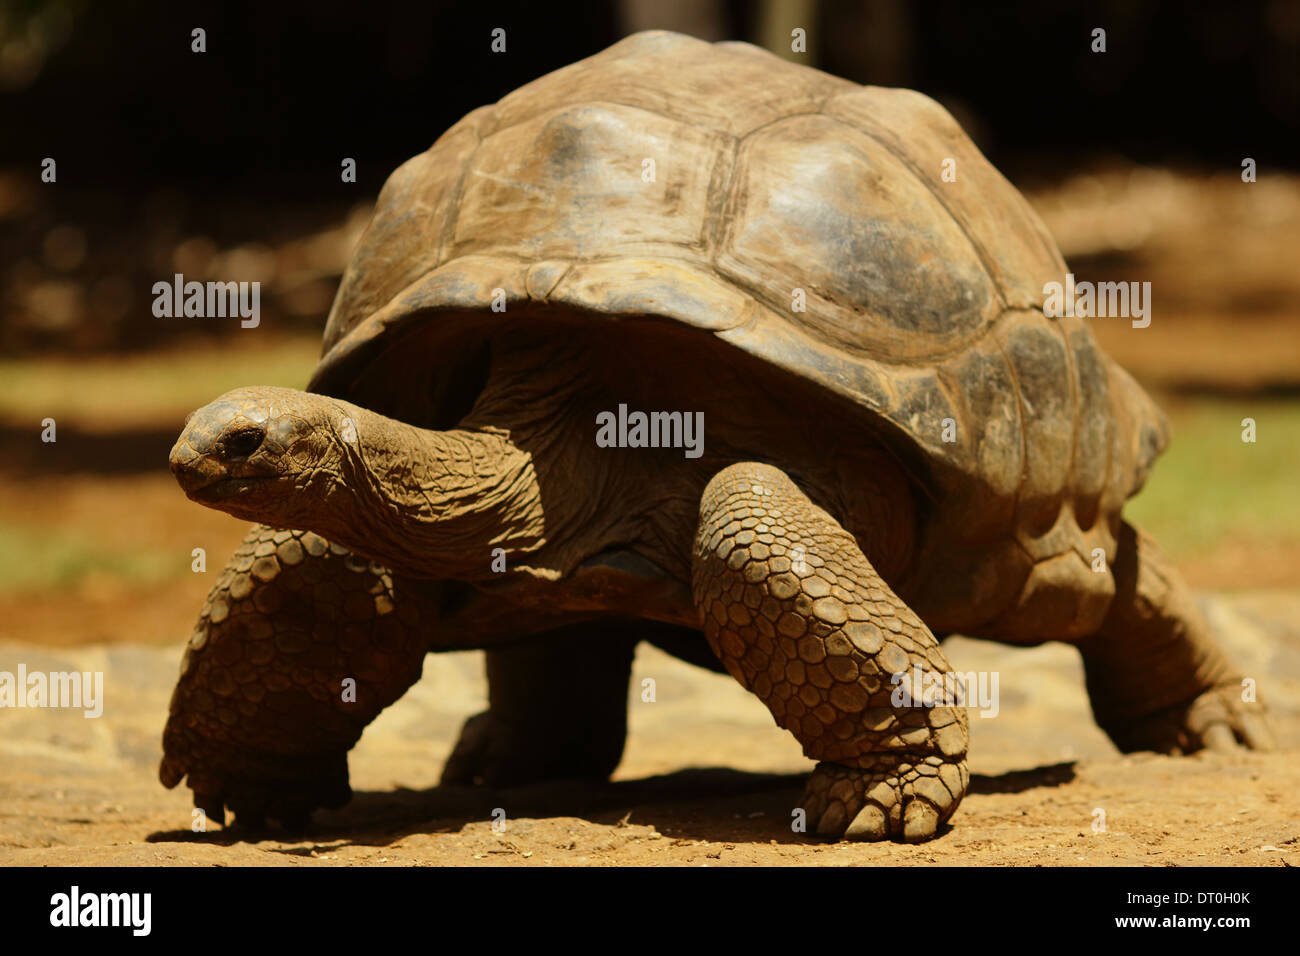 Tortoises are a family of land-dwelling reptiles in the order Testudines. Like other turtles, tortoises Stock Photo